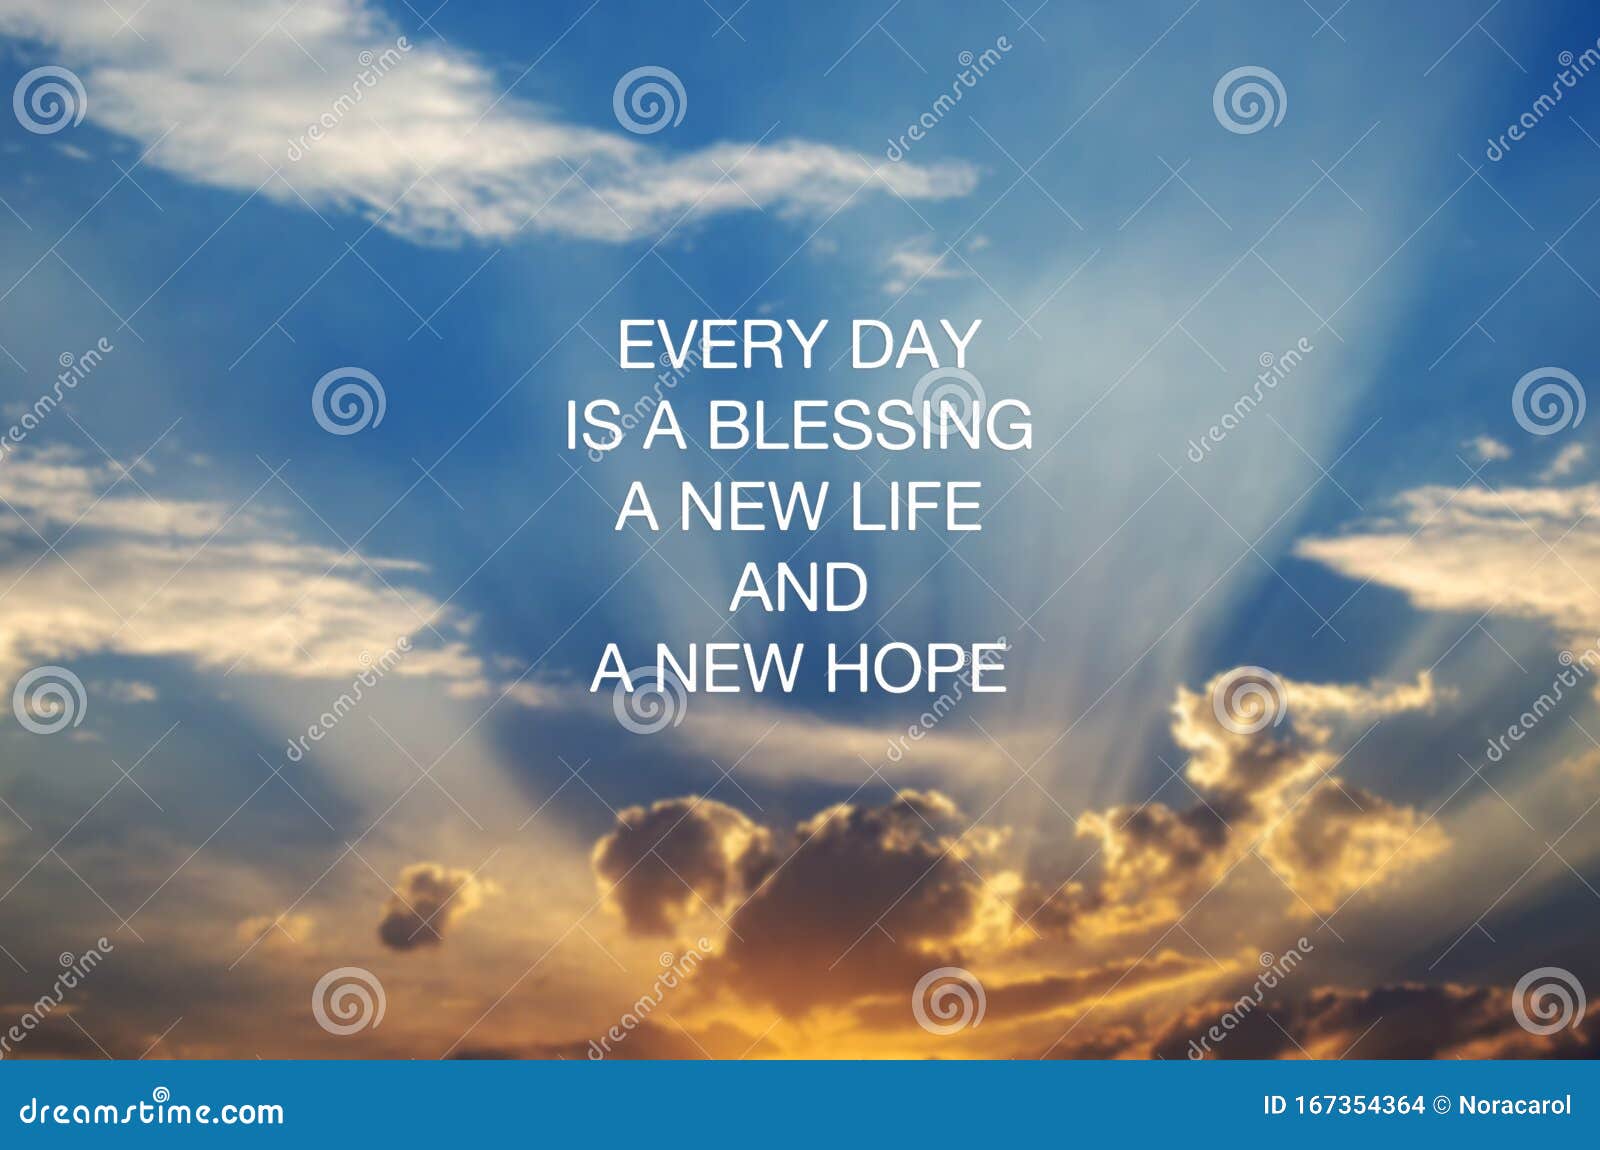 Inspirational Quotes Every Day Is A Blessing New Life And New Hope Stock Photo Image Of Conceptual Inspiration 167354364